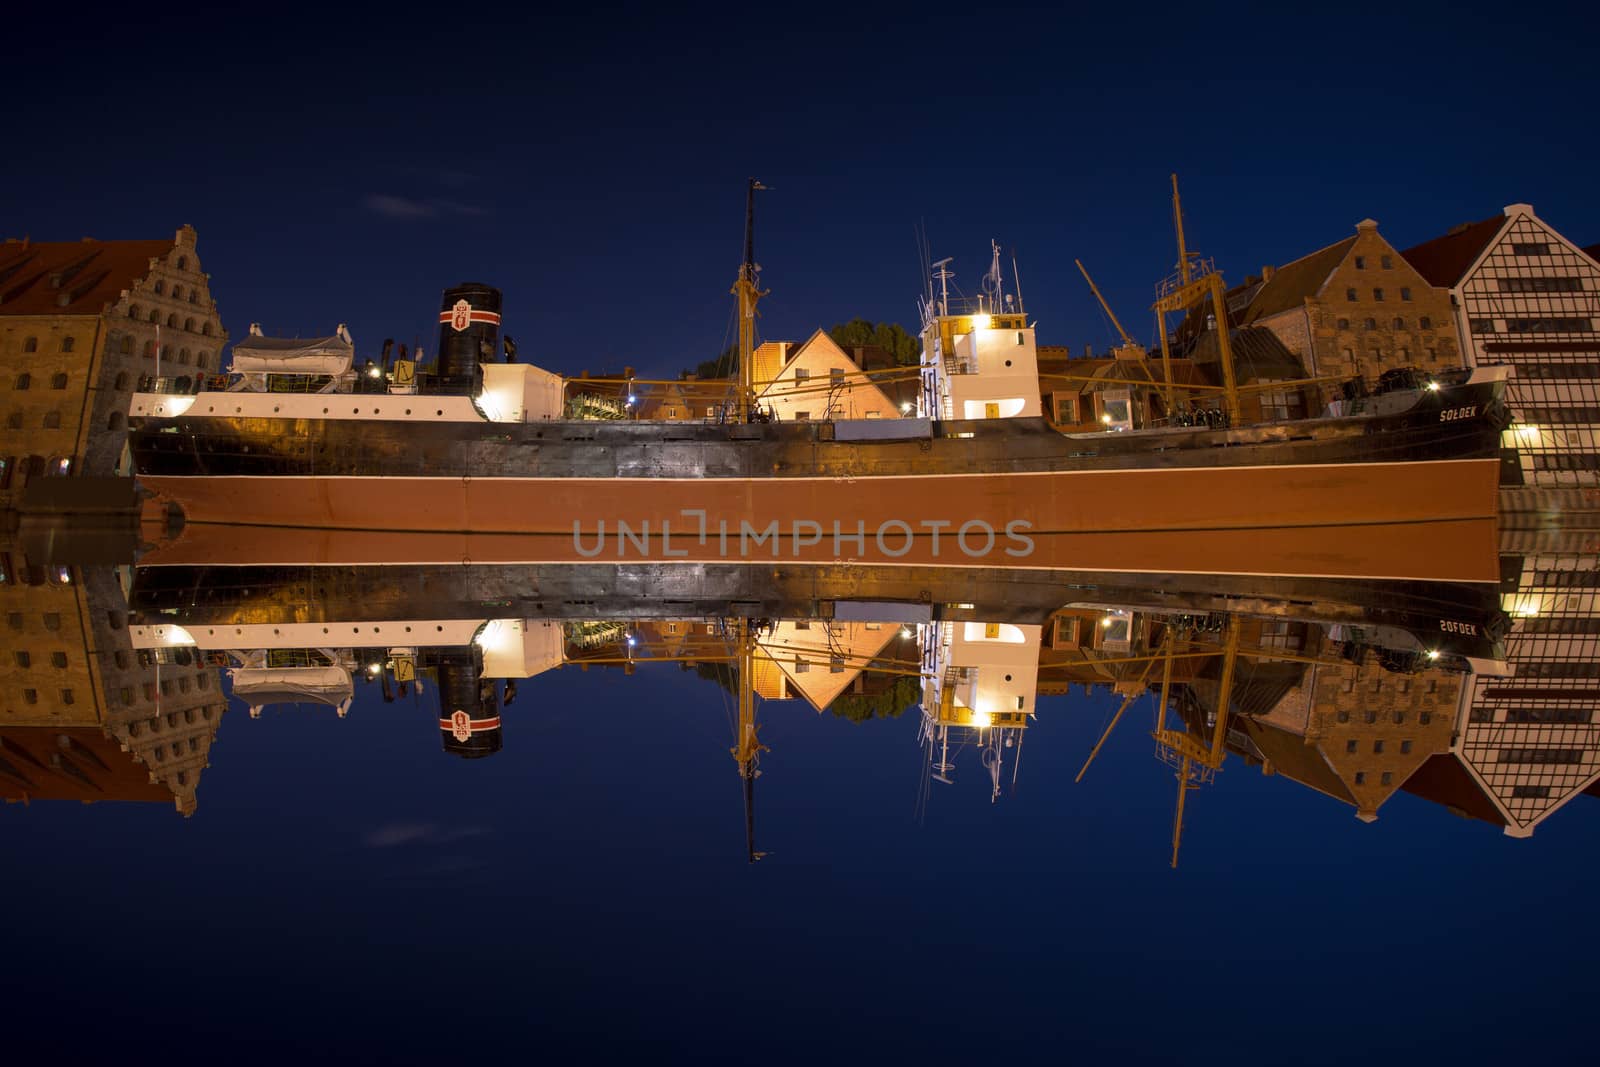 Mirror view of the Soldek at night in the river Motlawa, famous ship in the old port of Gdansk.